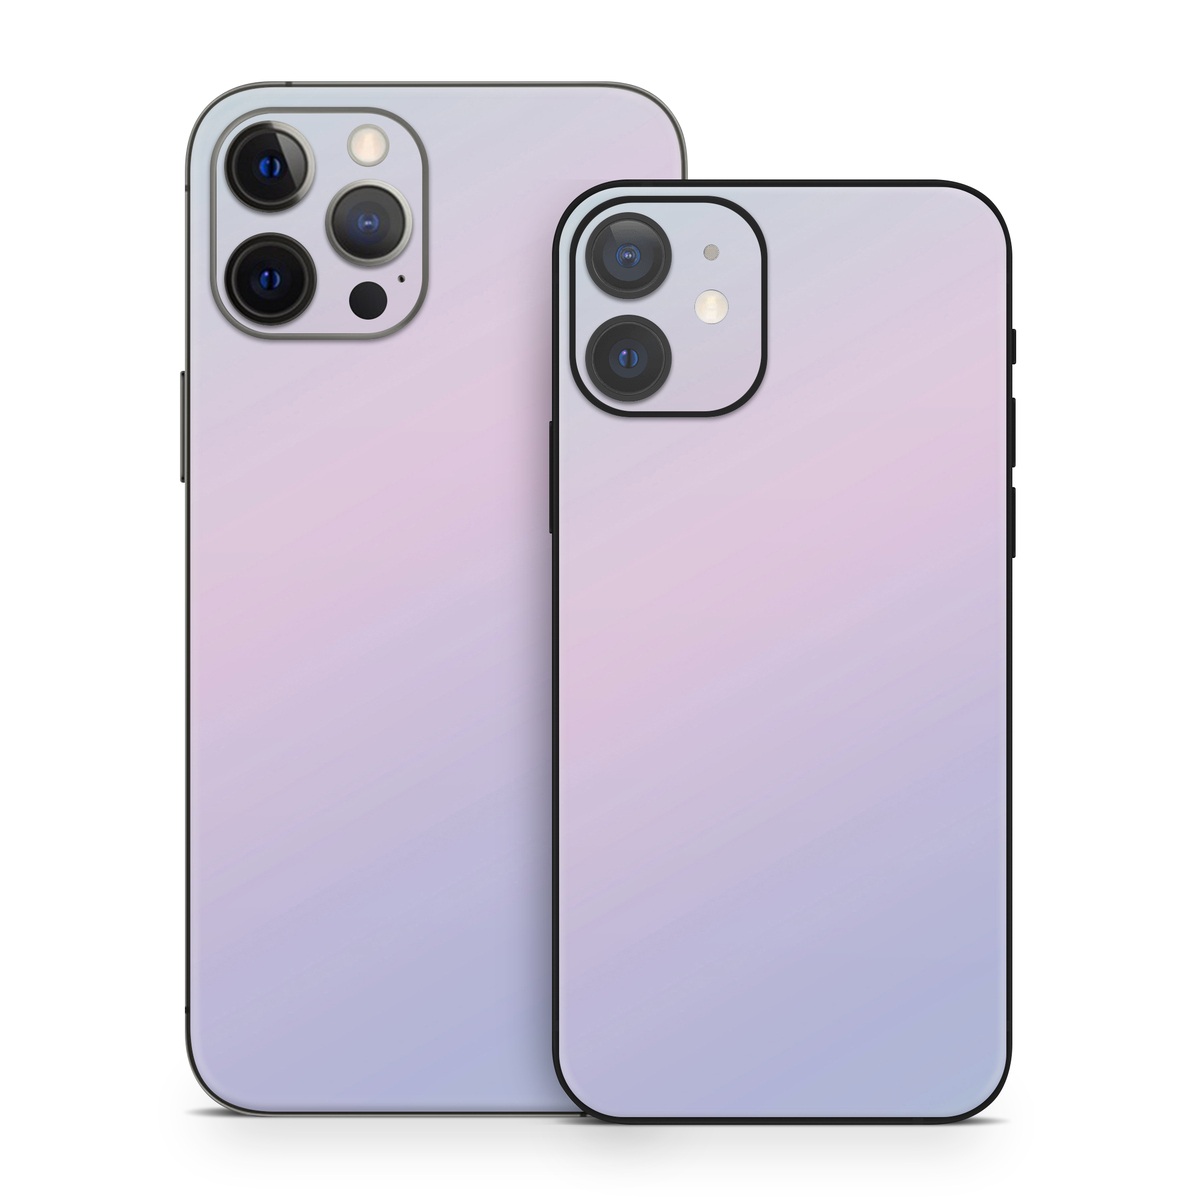 Apple iPhone 12 Skin - Cotton Candy (Image 1)